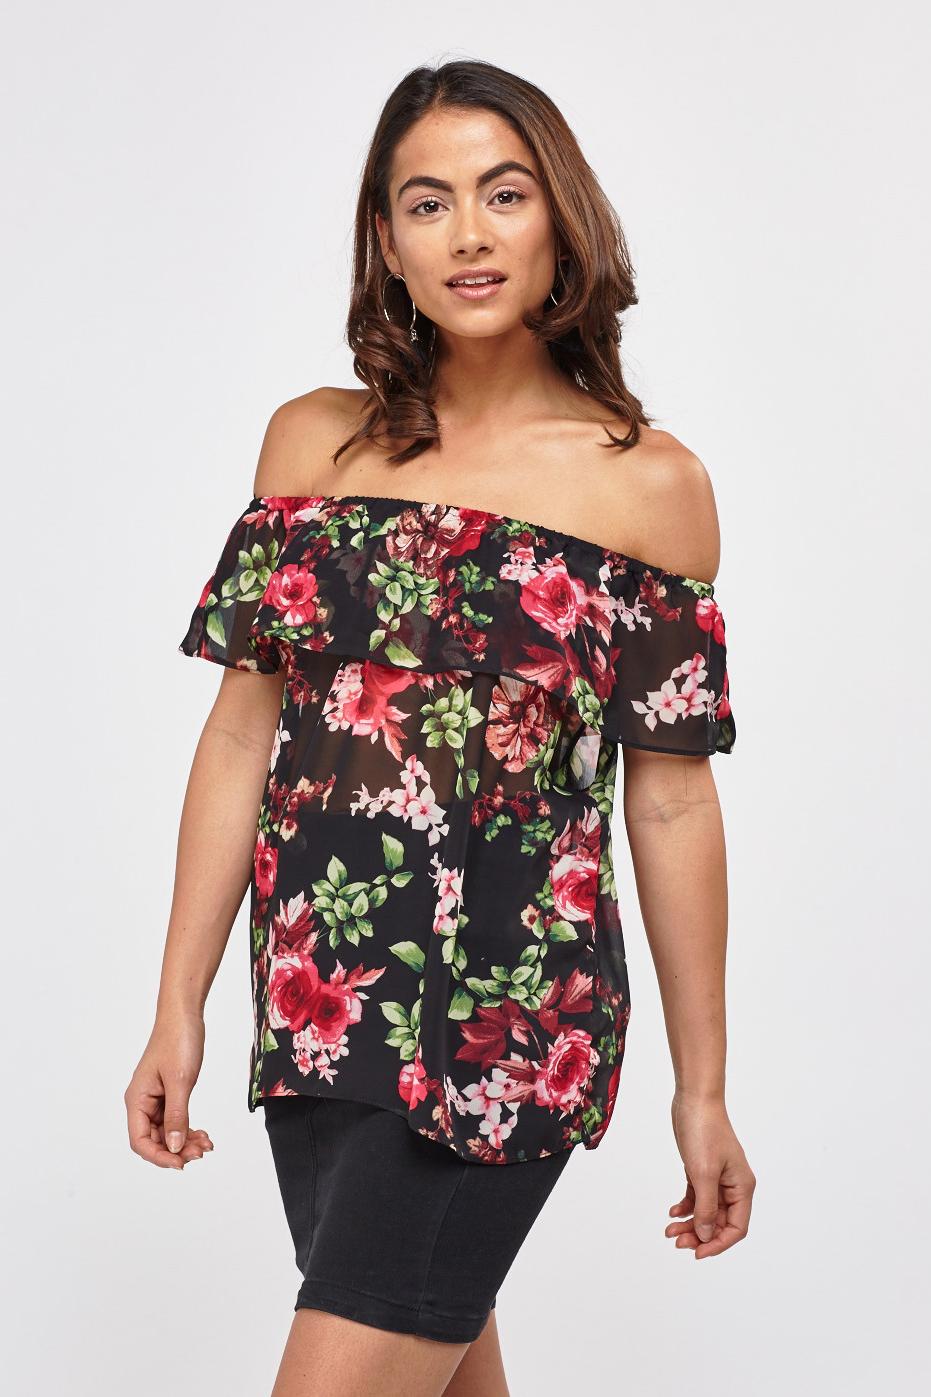 Floral Sheer Ruffle Top - Just $2